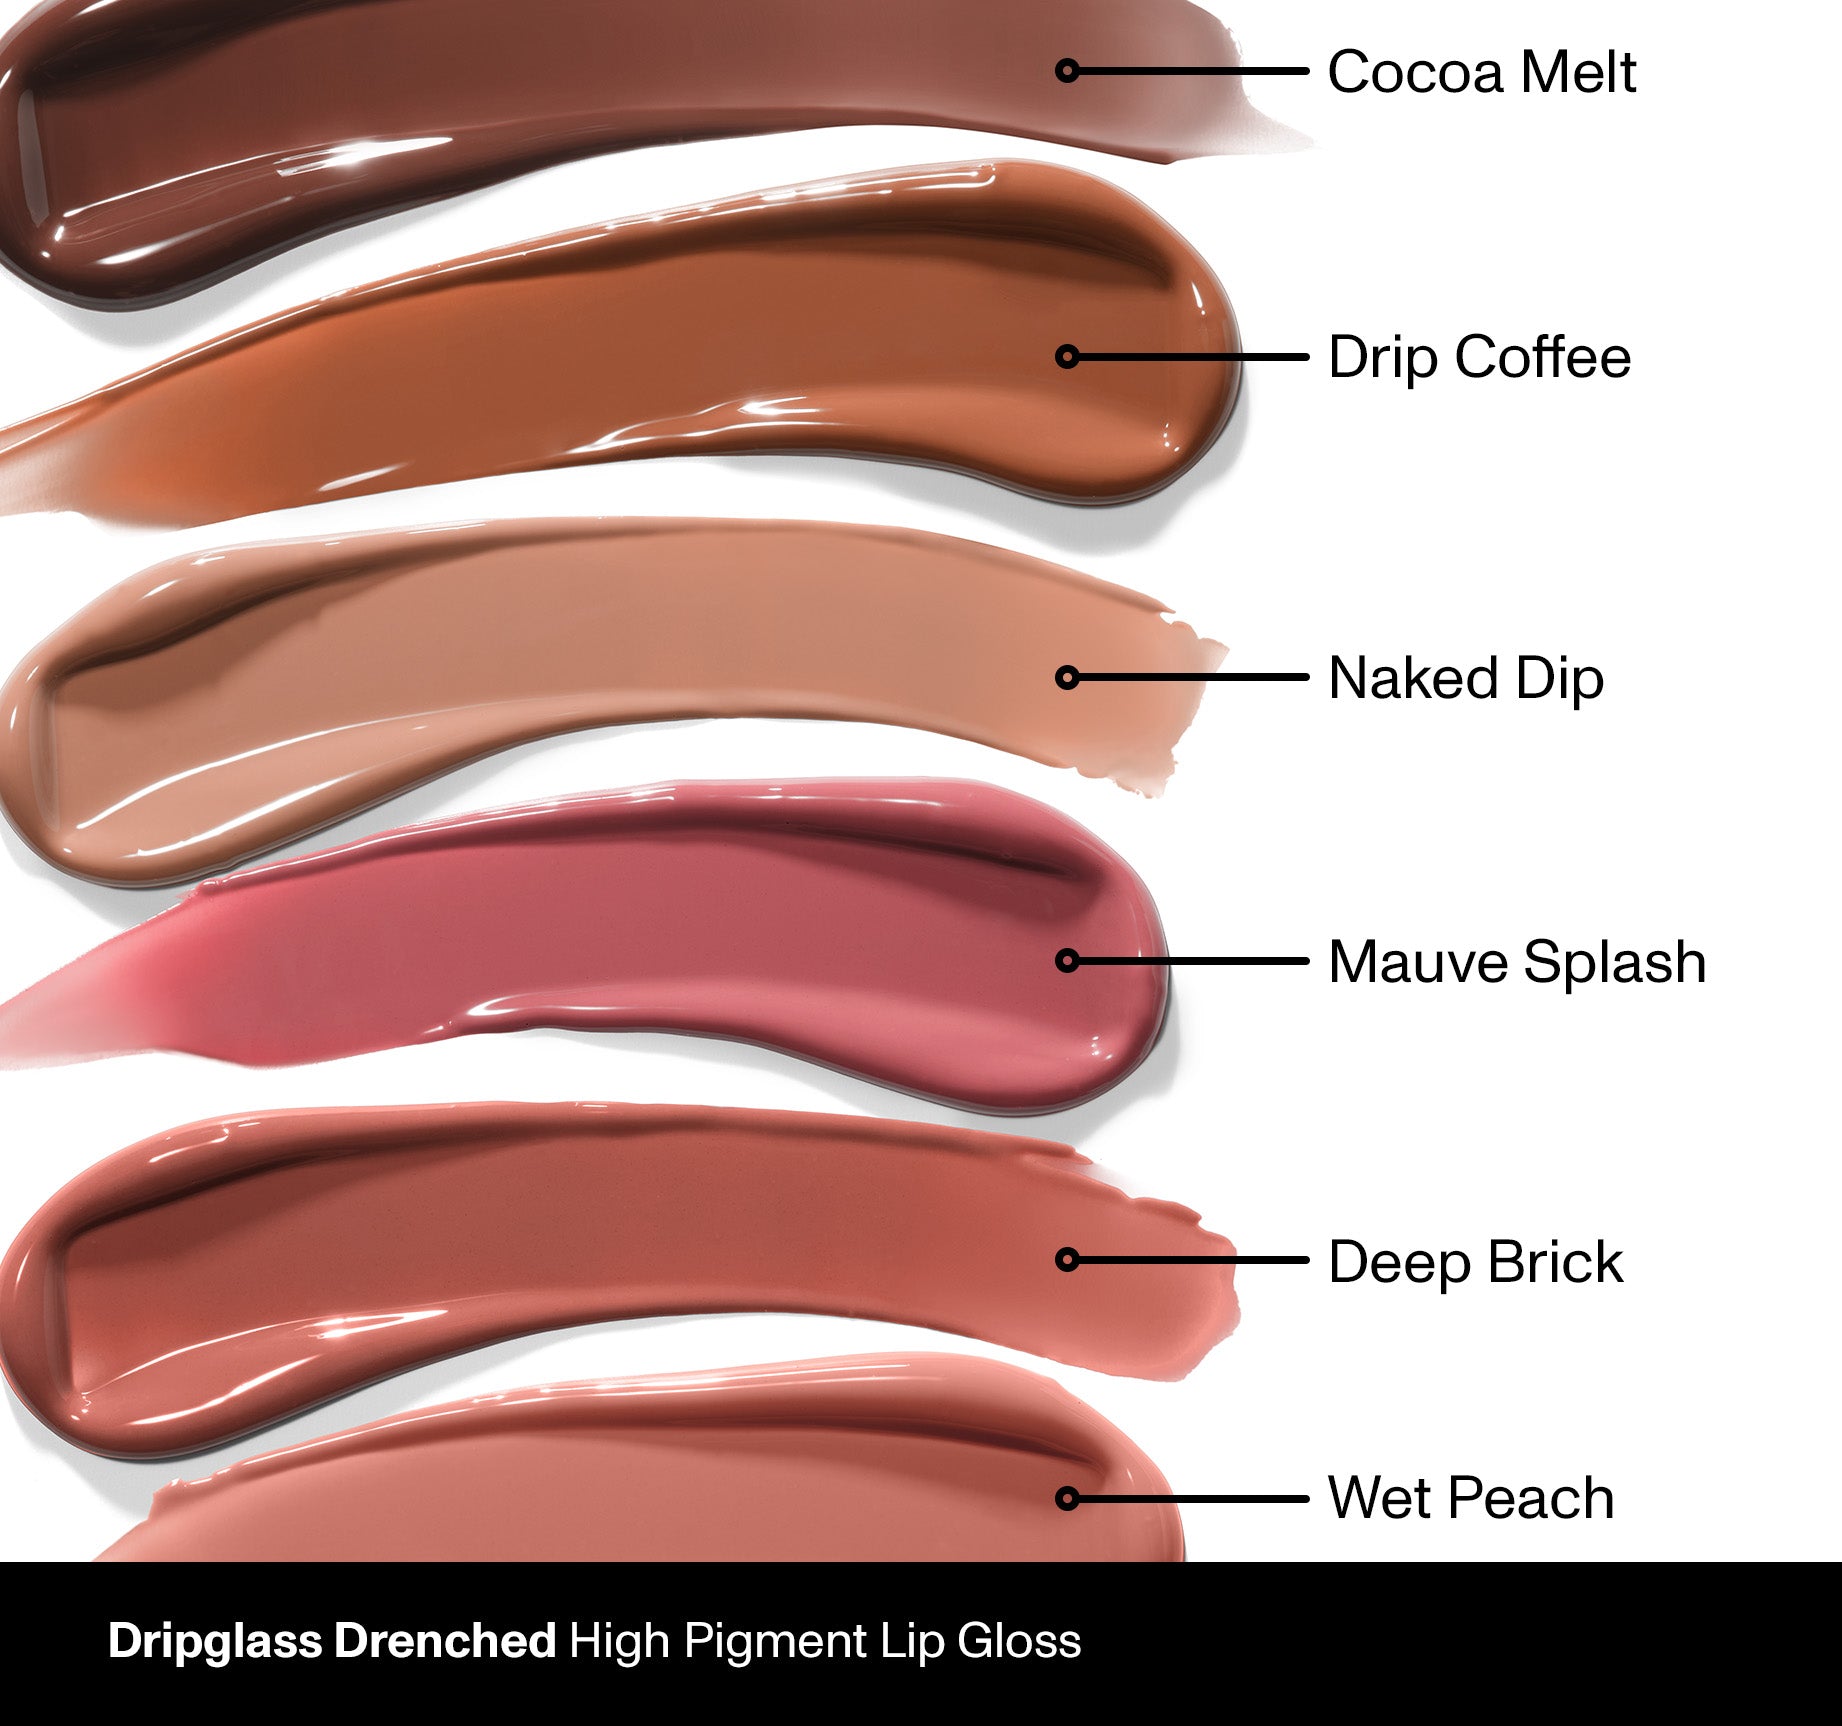 Dripglass Drenched High Pigment Lip Gloss - Drip Coffee - Image 6